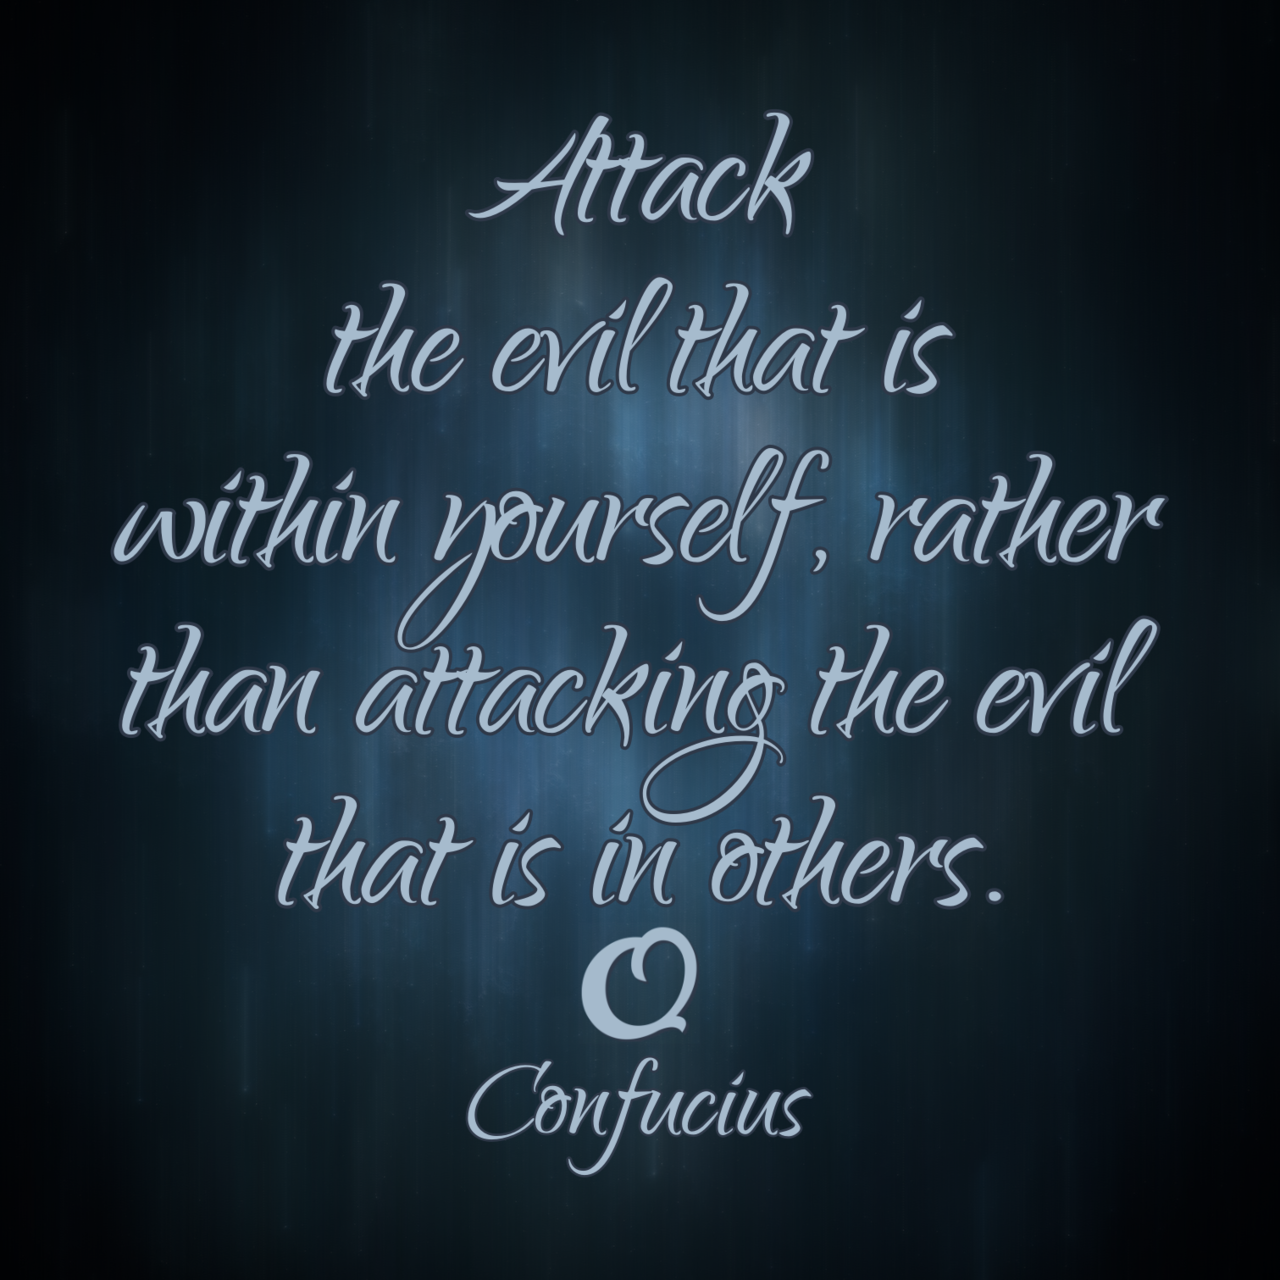 Confucius “Attack the evil that is within yourself, rather than attacking the evil that is in others.”